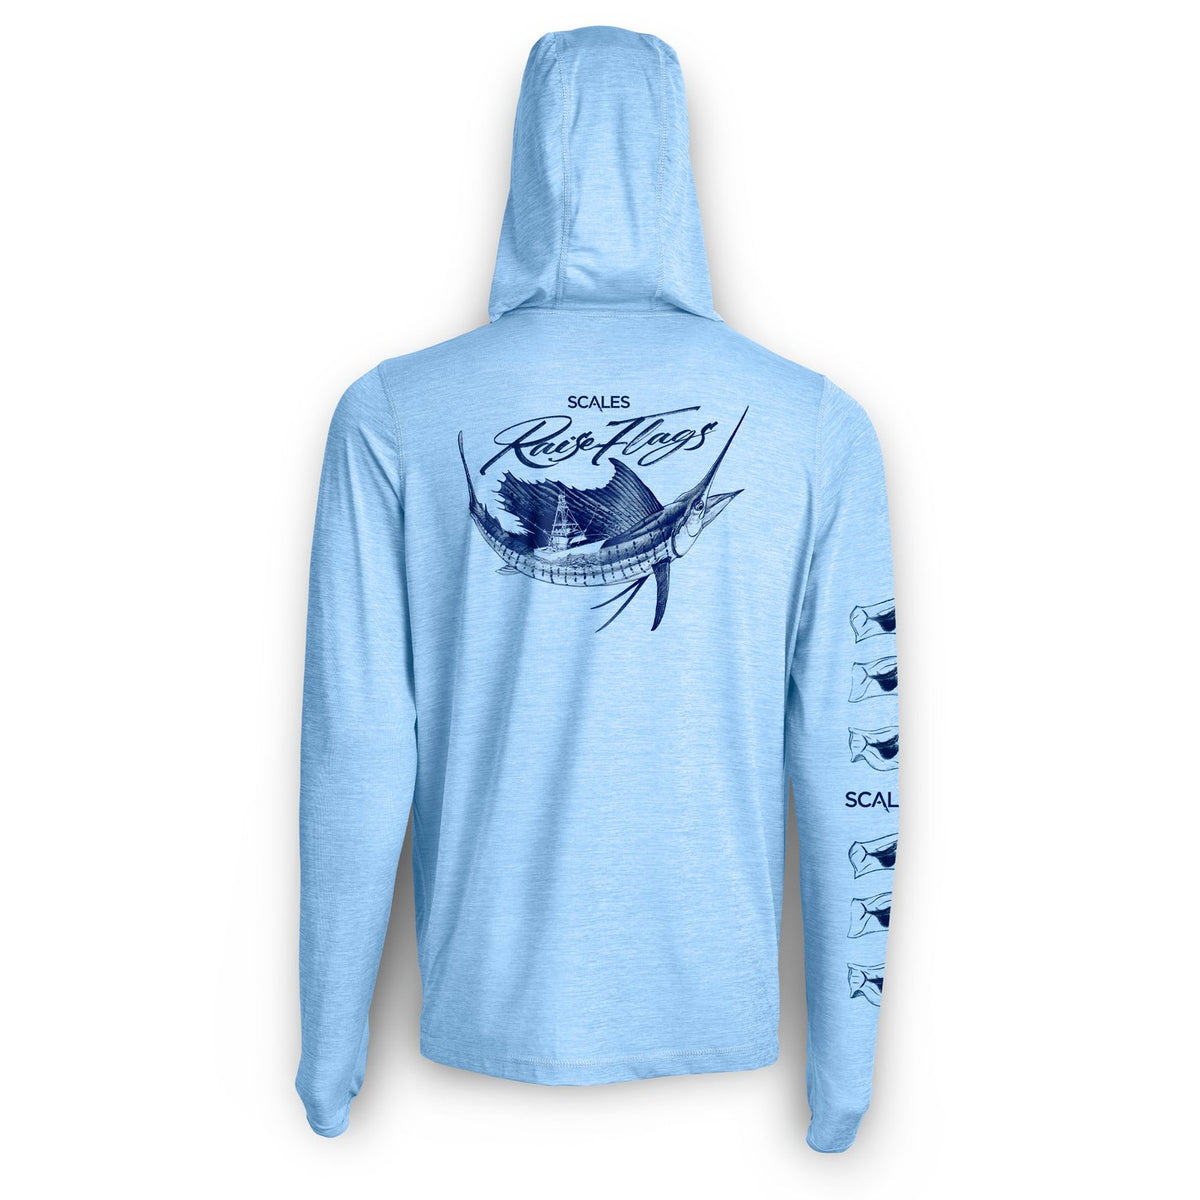 SCLAES Popping Sails Active Performance Hooded Long Sleeve